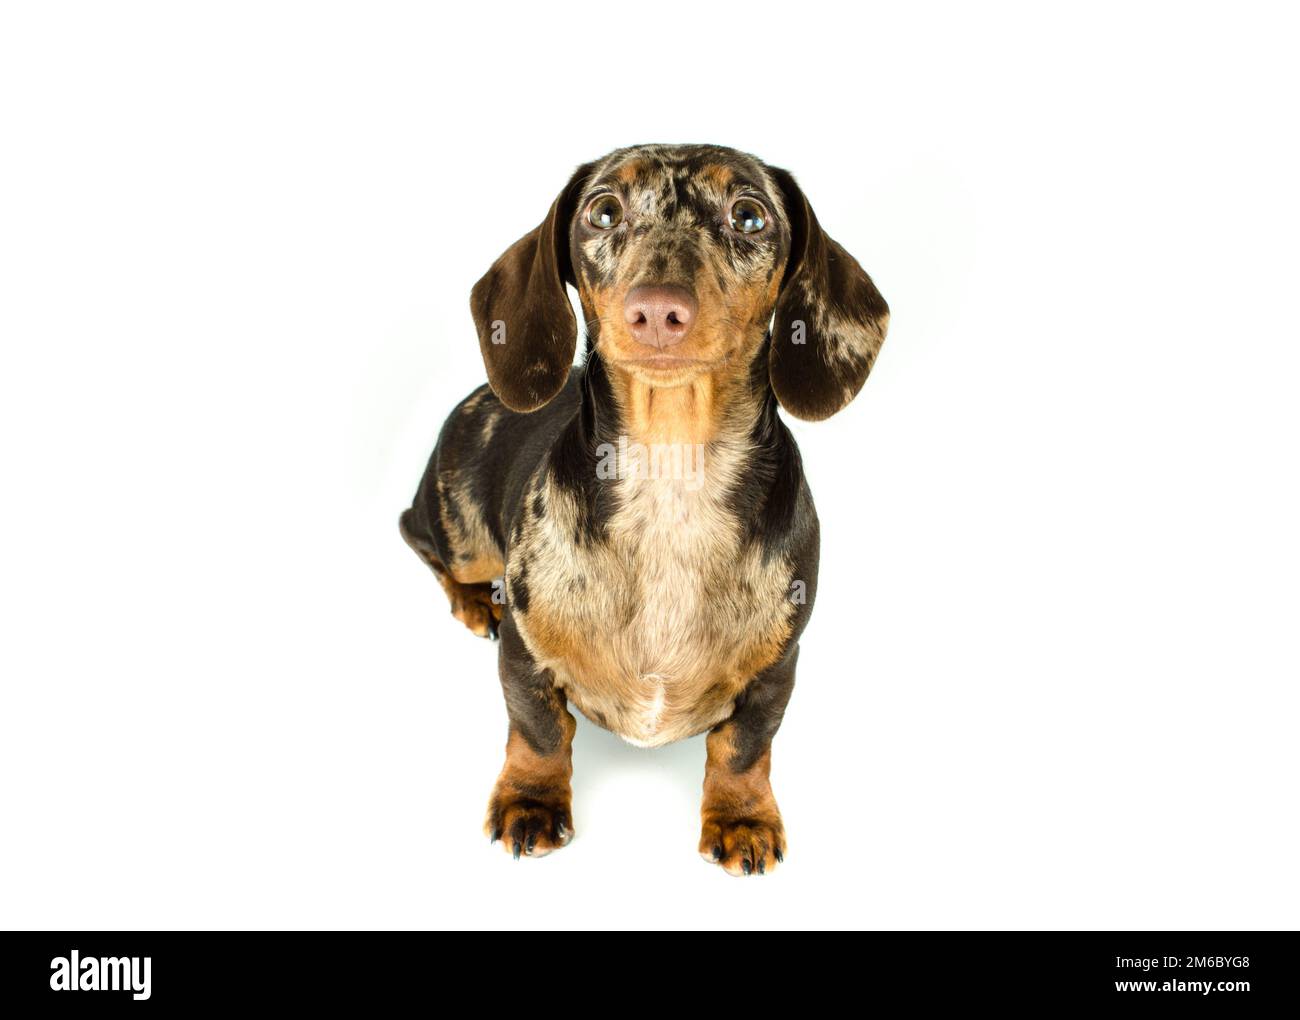 Short marble Dachshund Dog sit is looking ahead, hunting dog, isolated on white background. Stock Photo